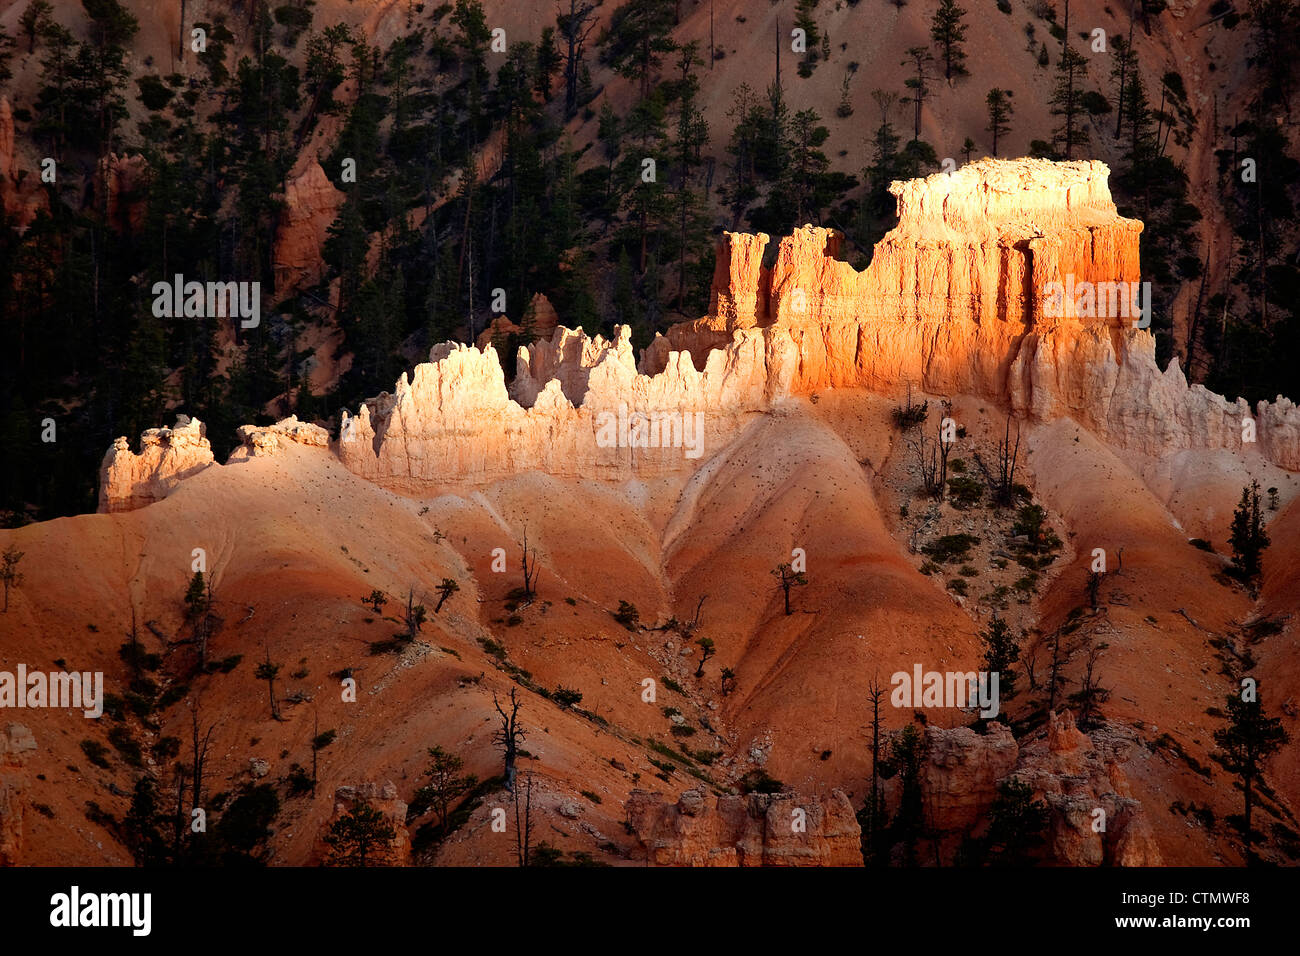 Sandstone formation in the Bryce amphitheater, Bryce Canyon National Park, USA. Stock Photo